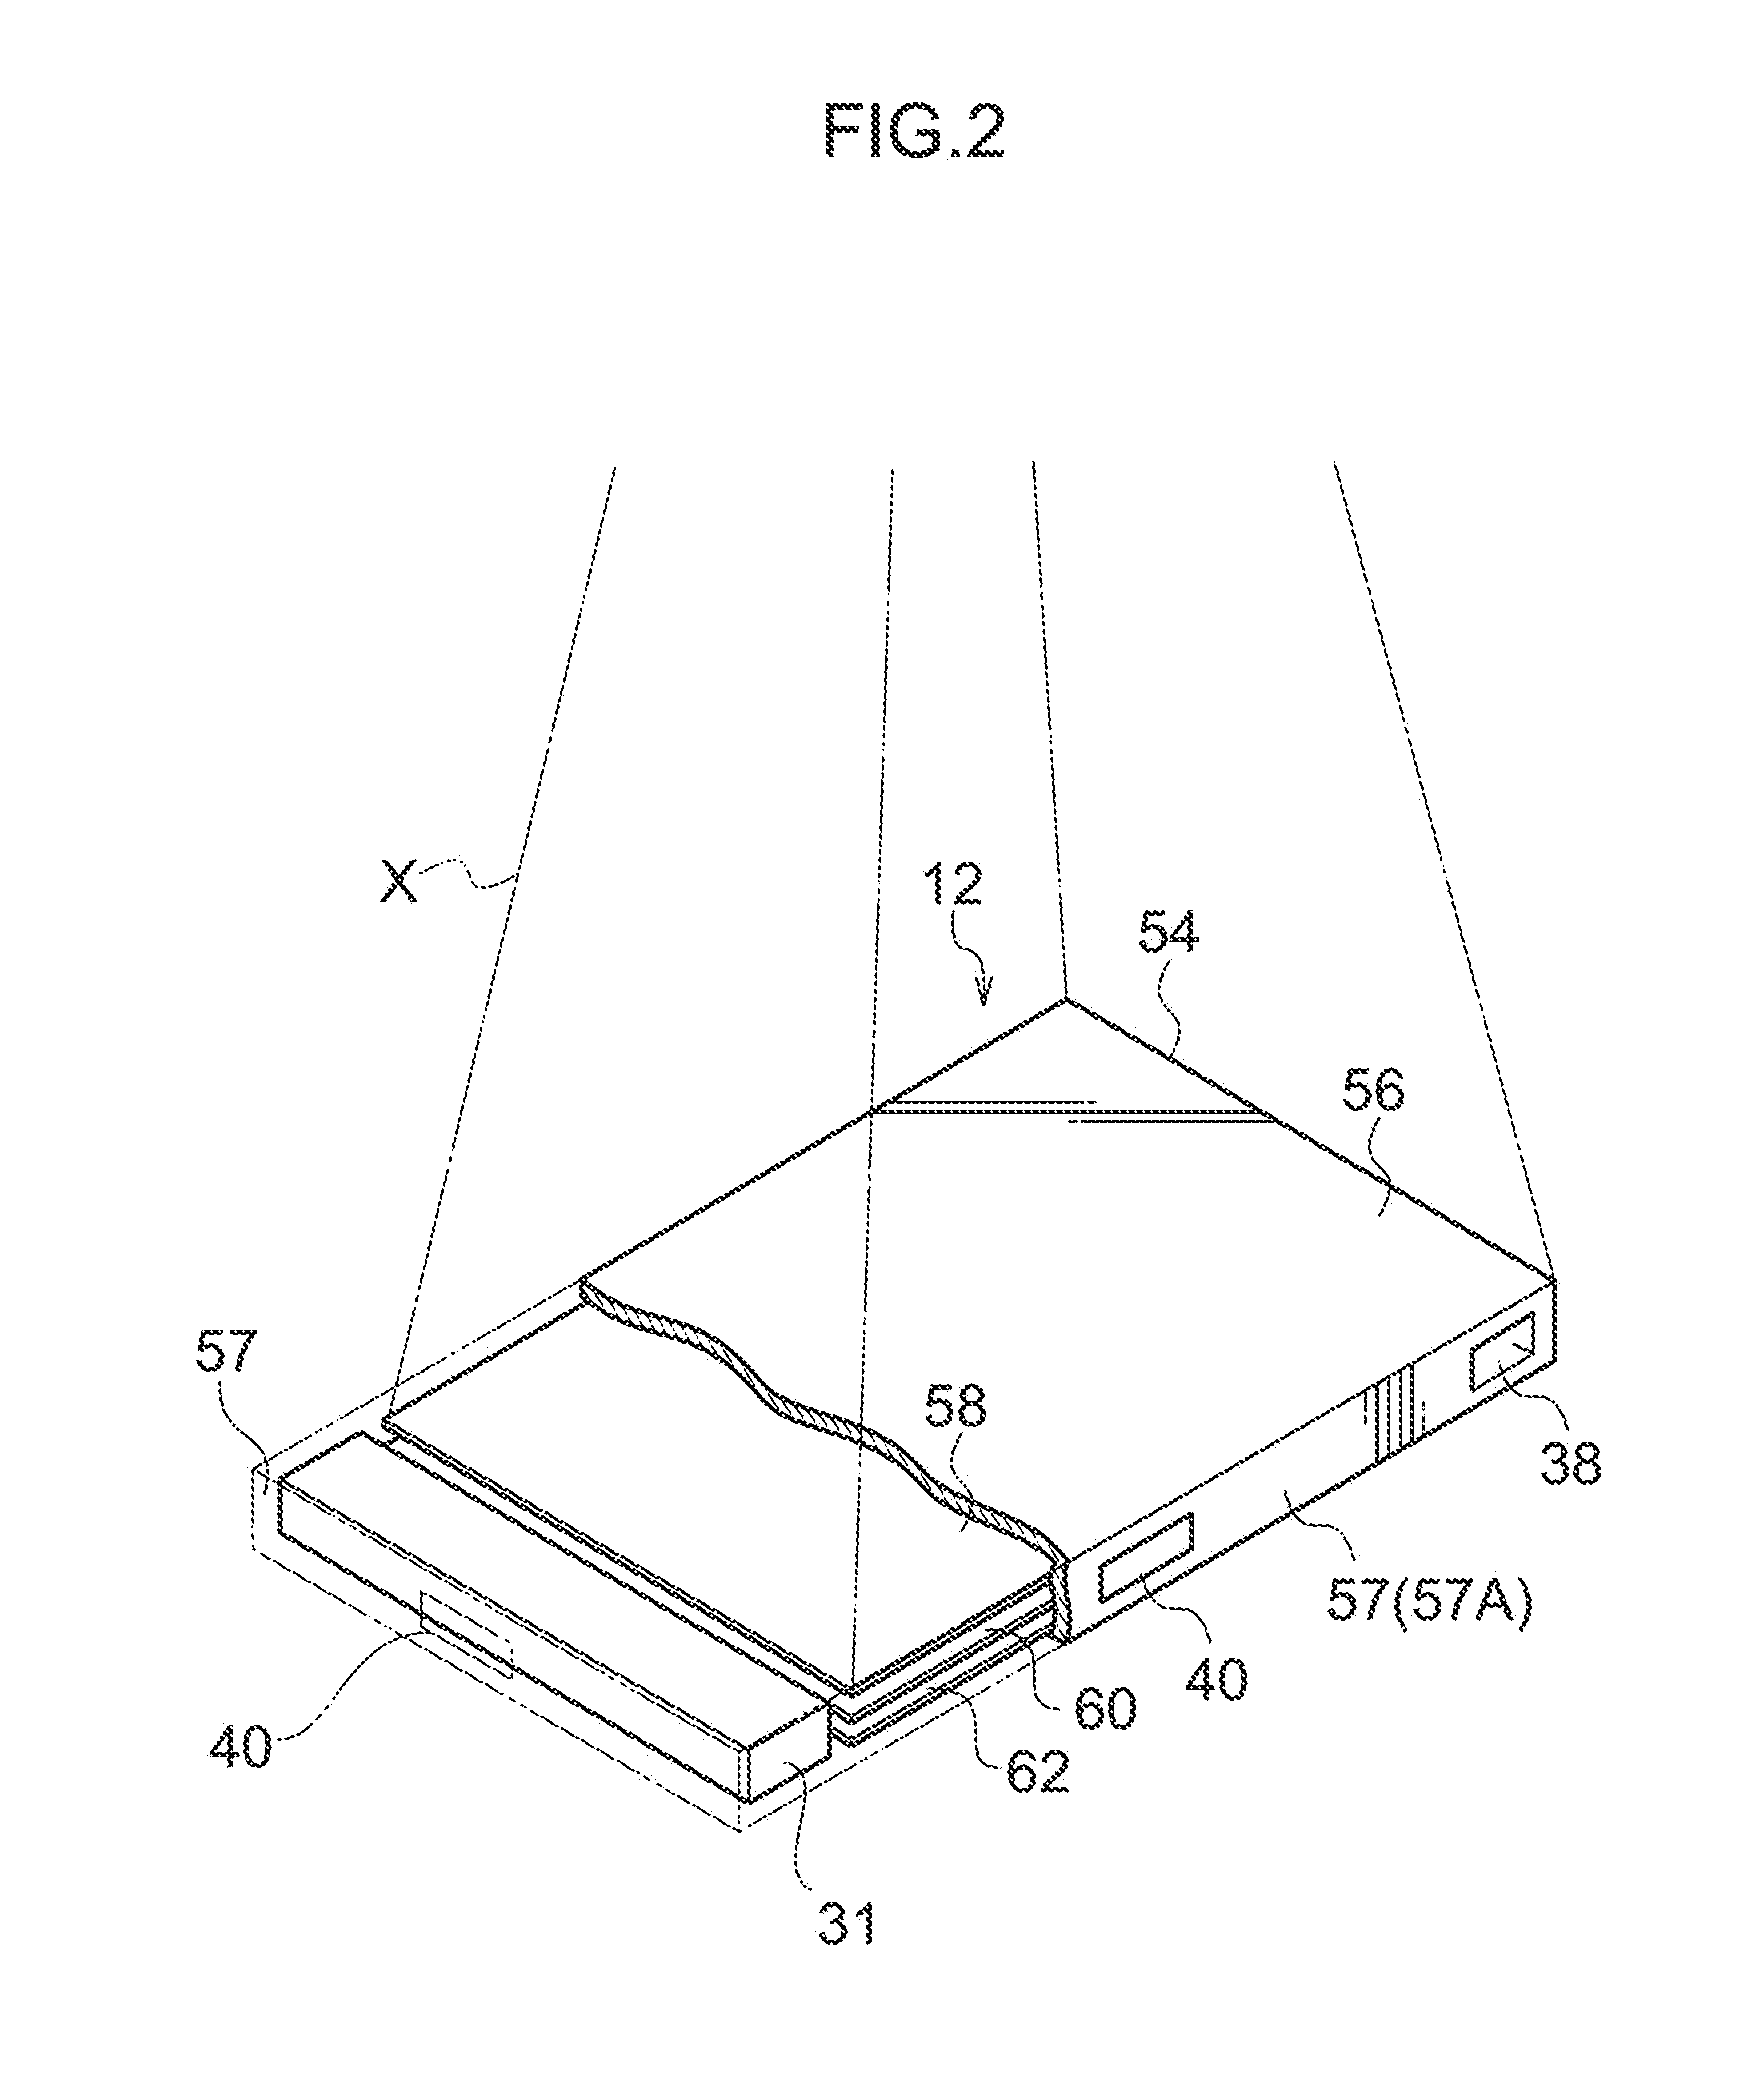 Radiographic image capture system, portable radiographic image capture device, image capture table